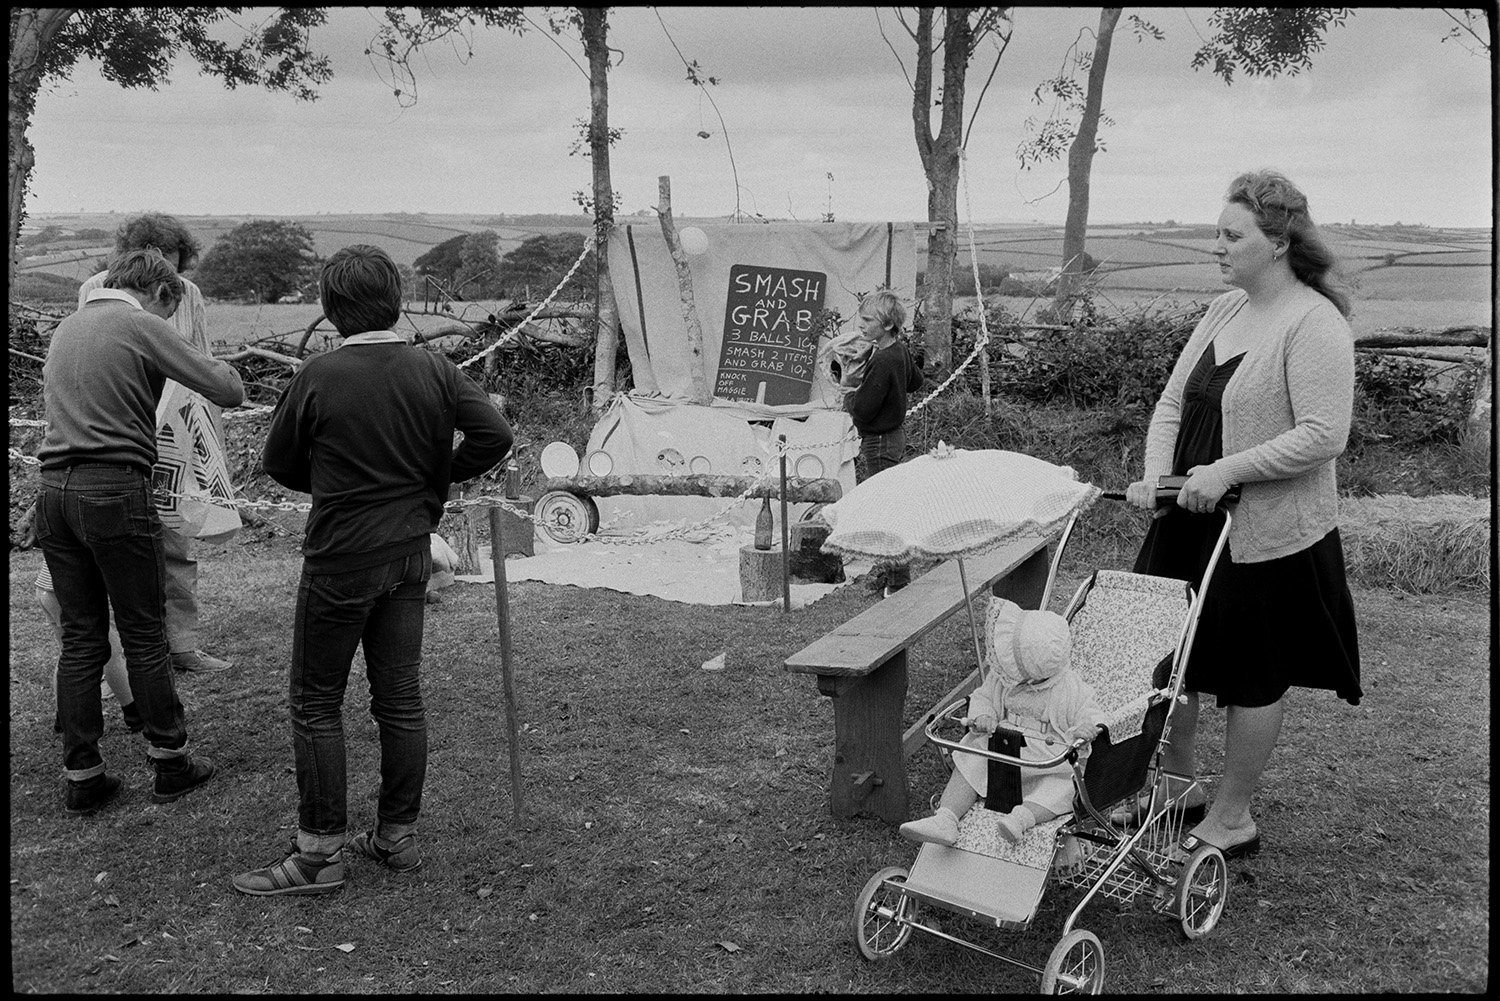 Garden fete, stalls, cakes, smash and grab.
[Man, woman and three children standing in front of a Smash and Grab game between two trees at a fete being held at Lanes End, Beaford. The woman is pushing a baby under a parasol in a pushchair. A landscape with trees, fields and hedgerows is visible in the background.]